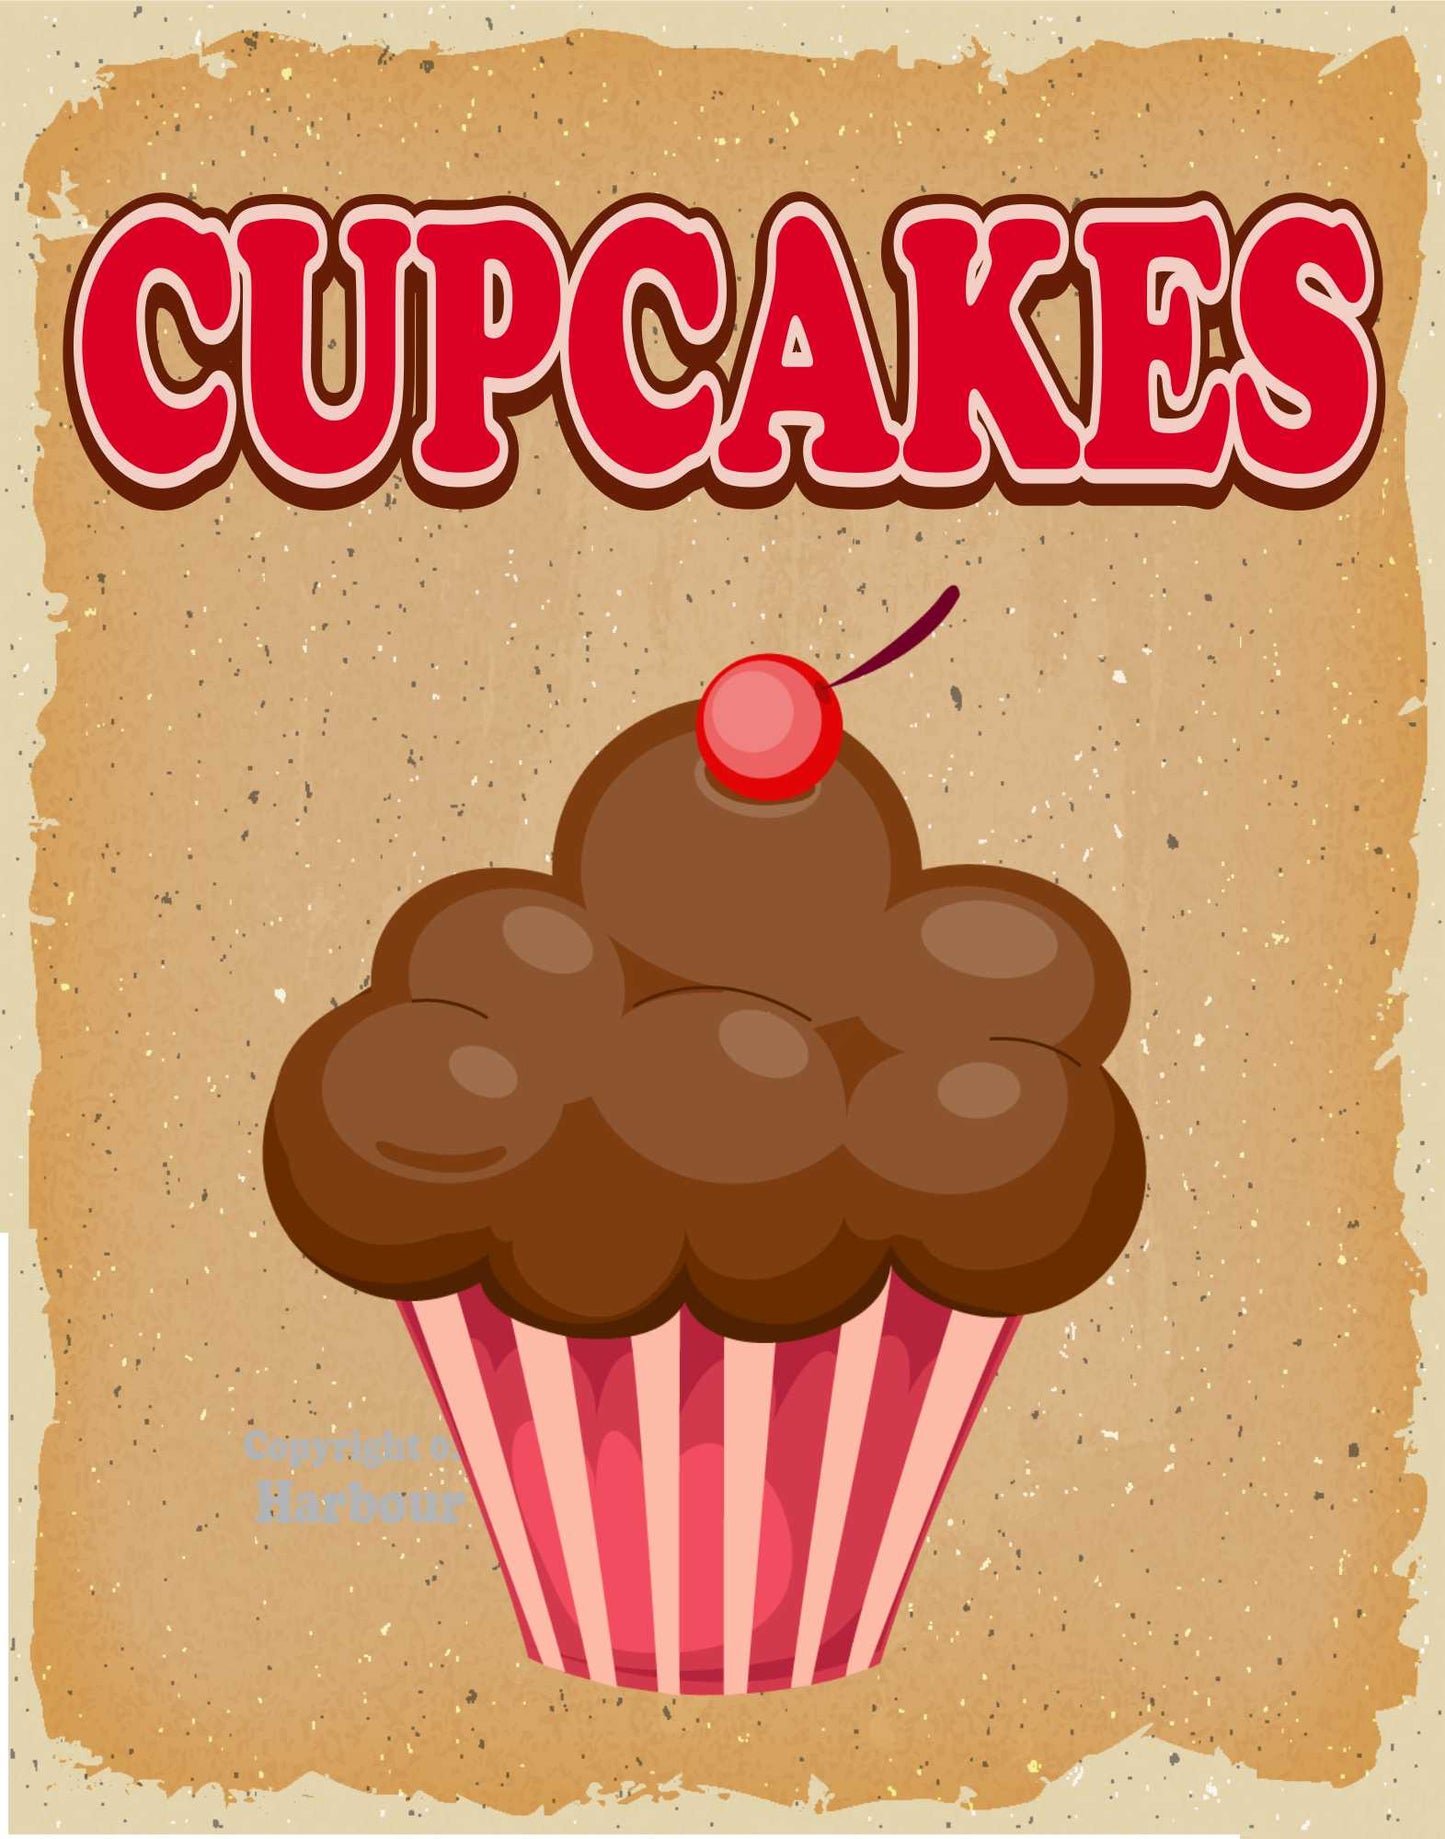 Cupcakes Decal Food Truck Concession Vinyl Sticker v